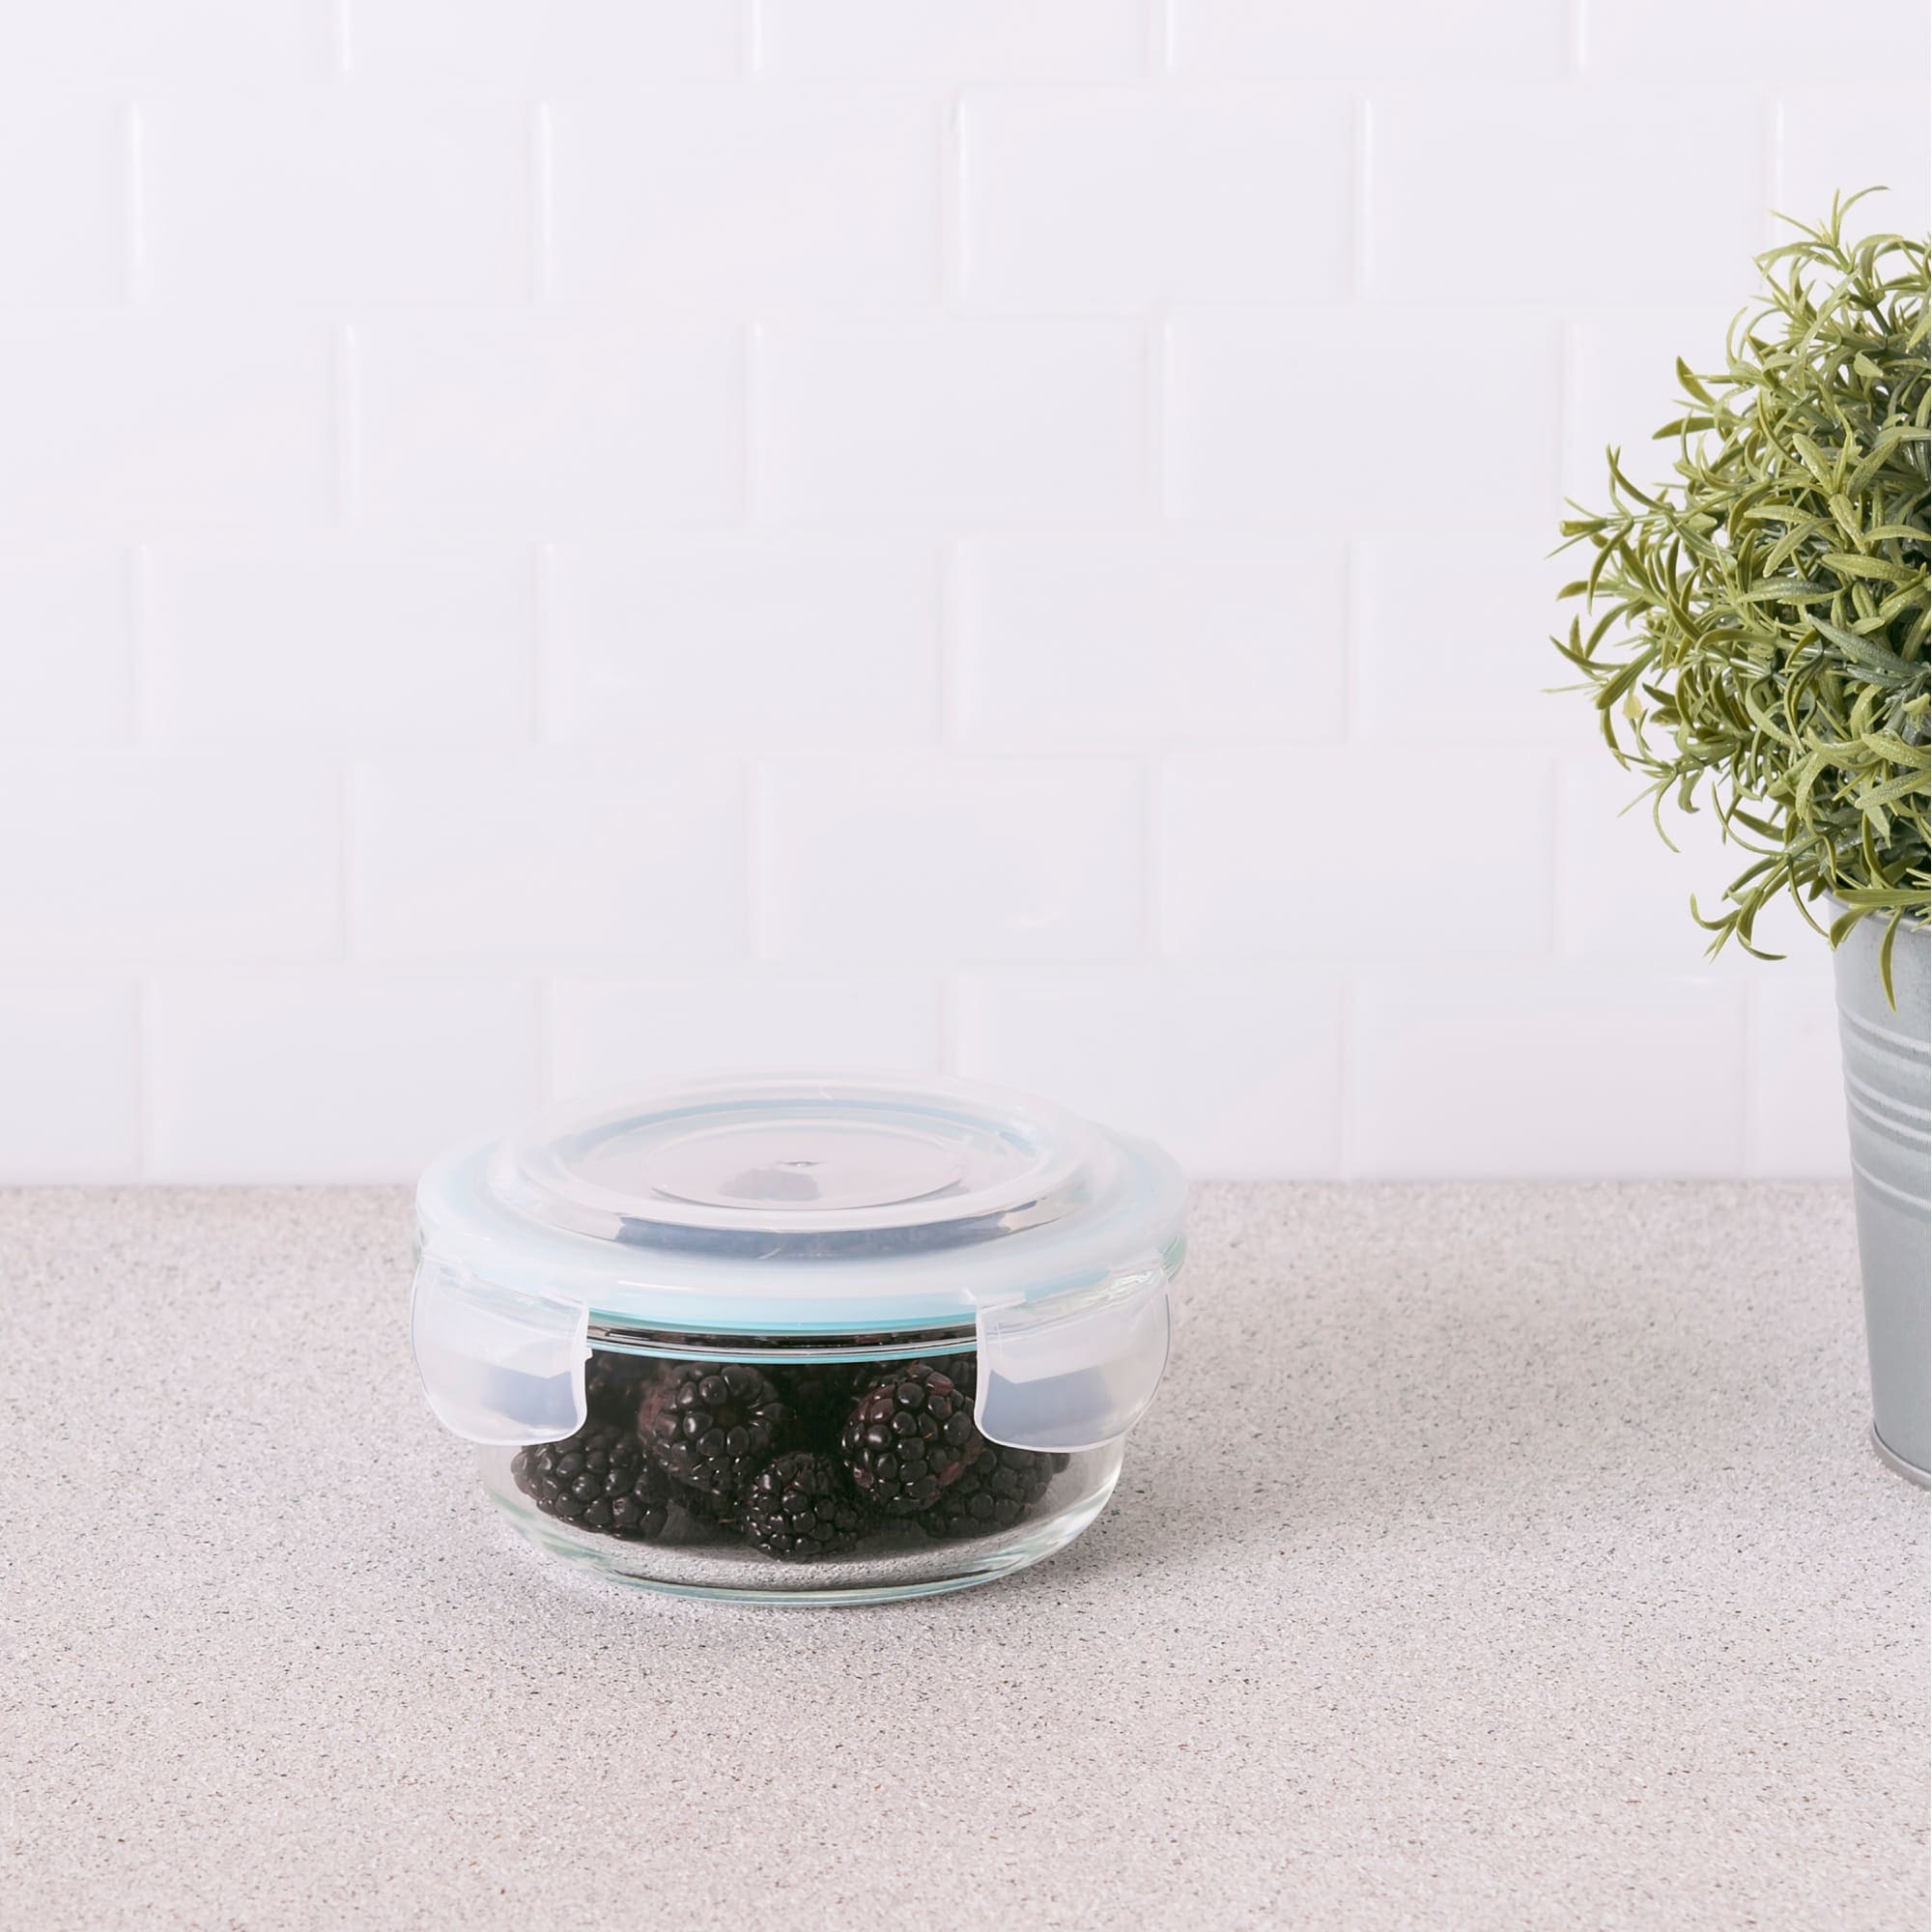 Home Basics 13 oz. Round Borosilicate Glass Food Storage Container $3.00 EACH, CASE PACK OF 12